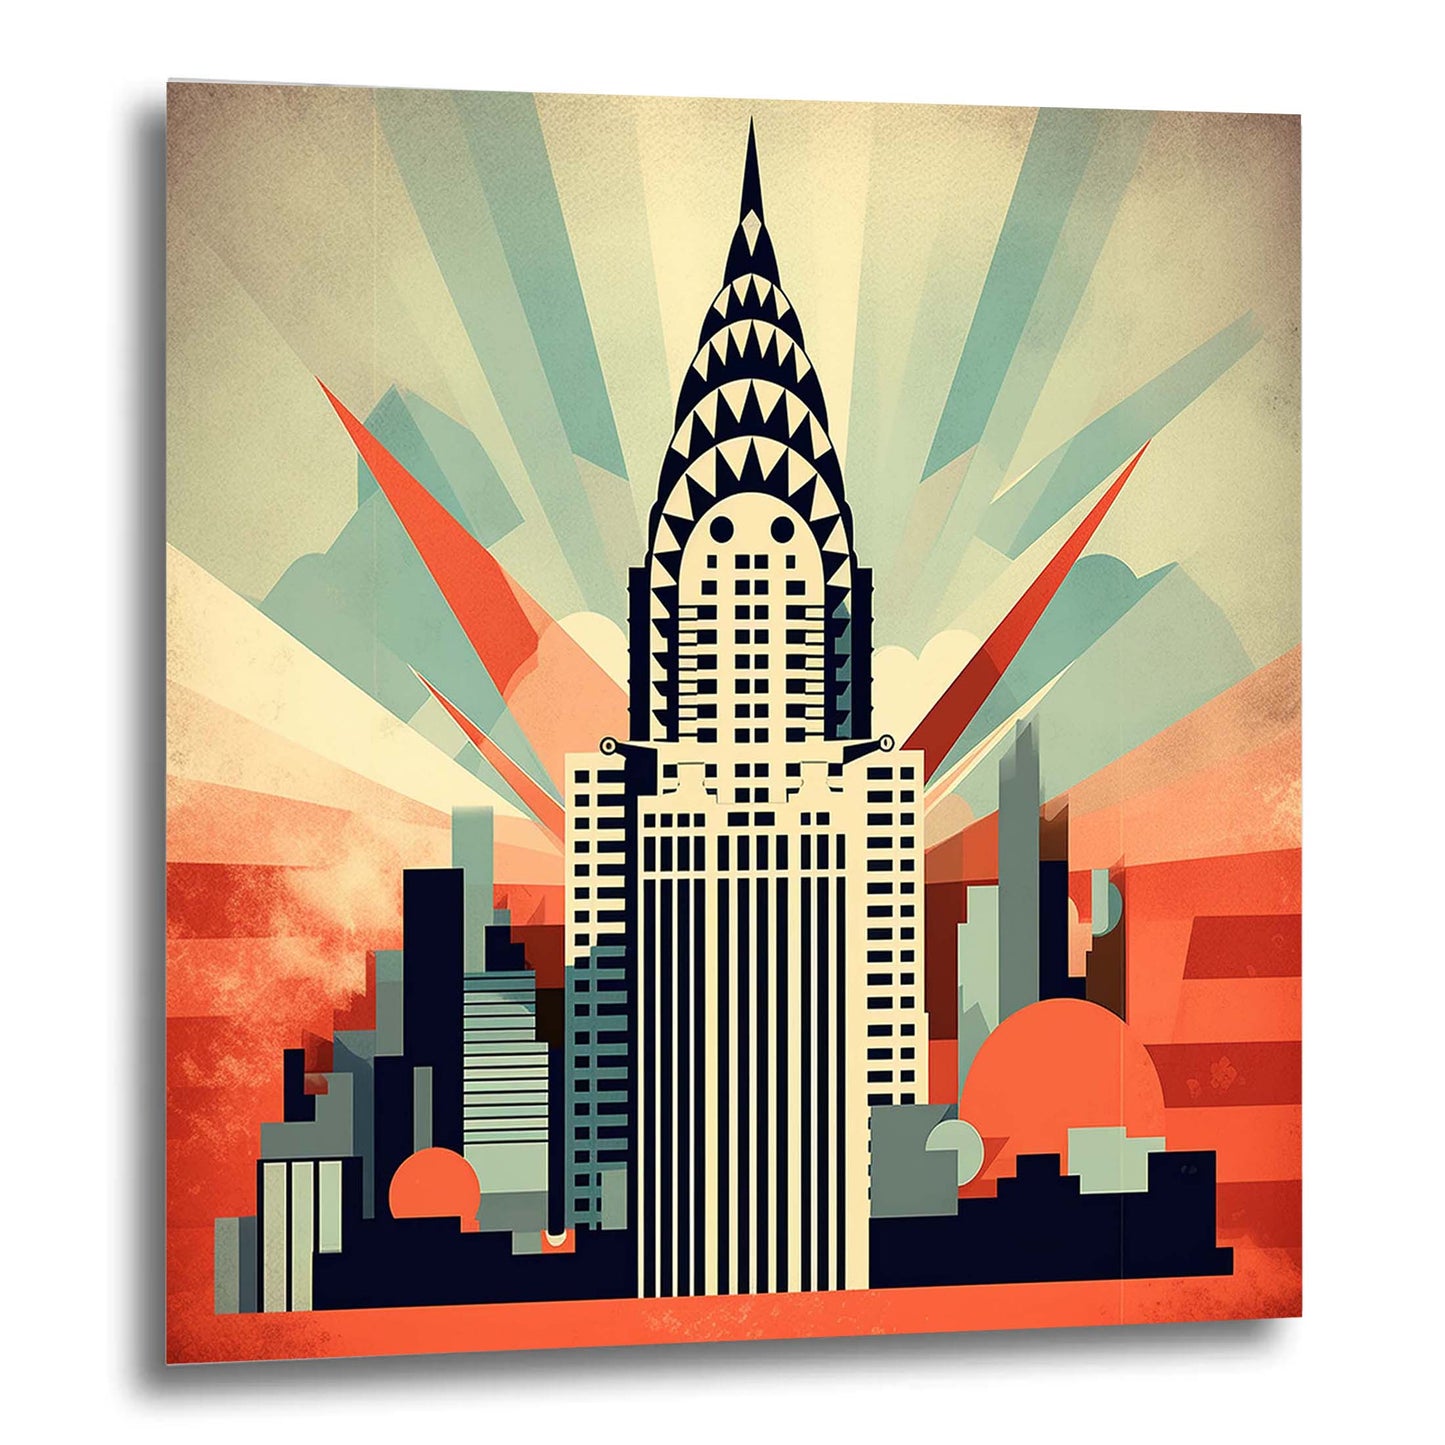 New York Chrysler Building - mural in the style of minimalism